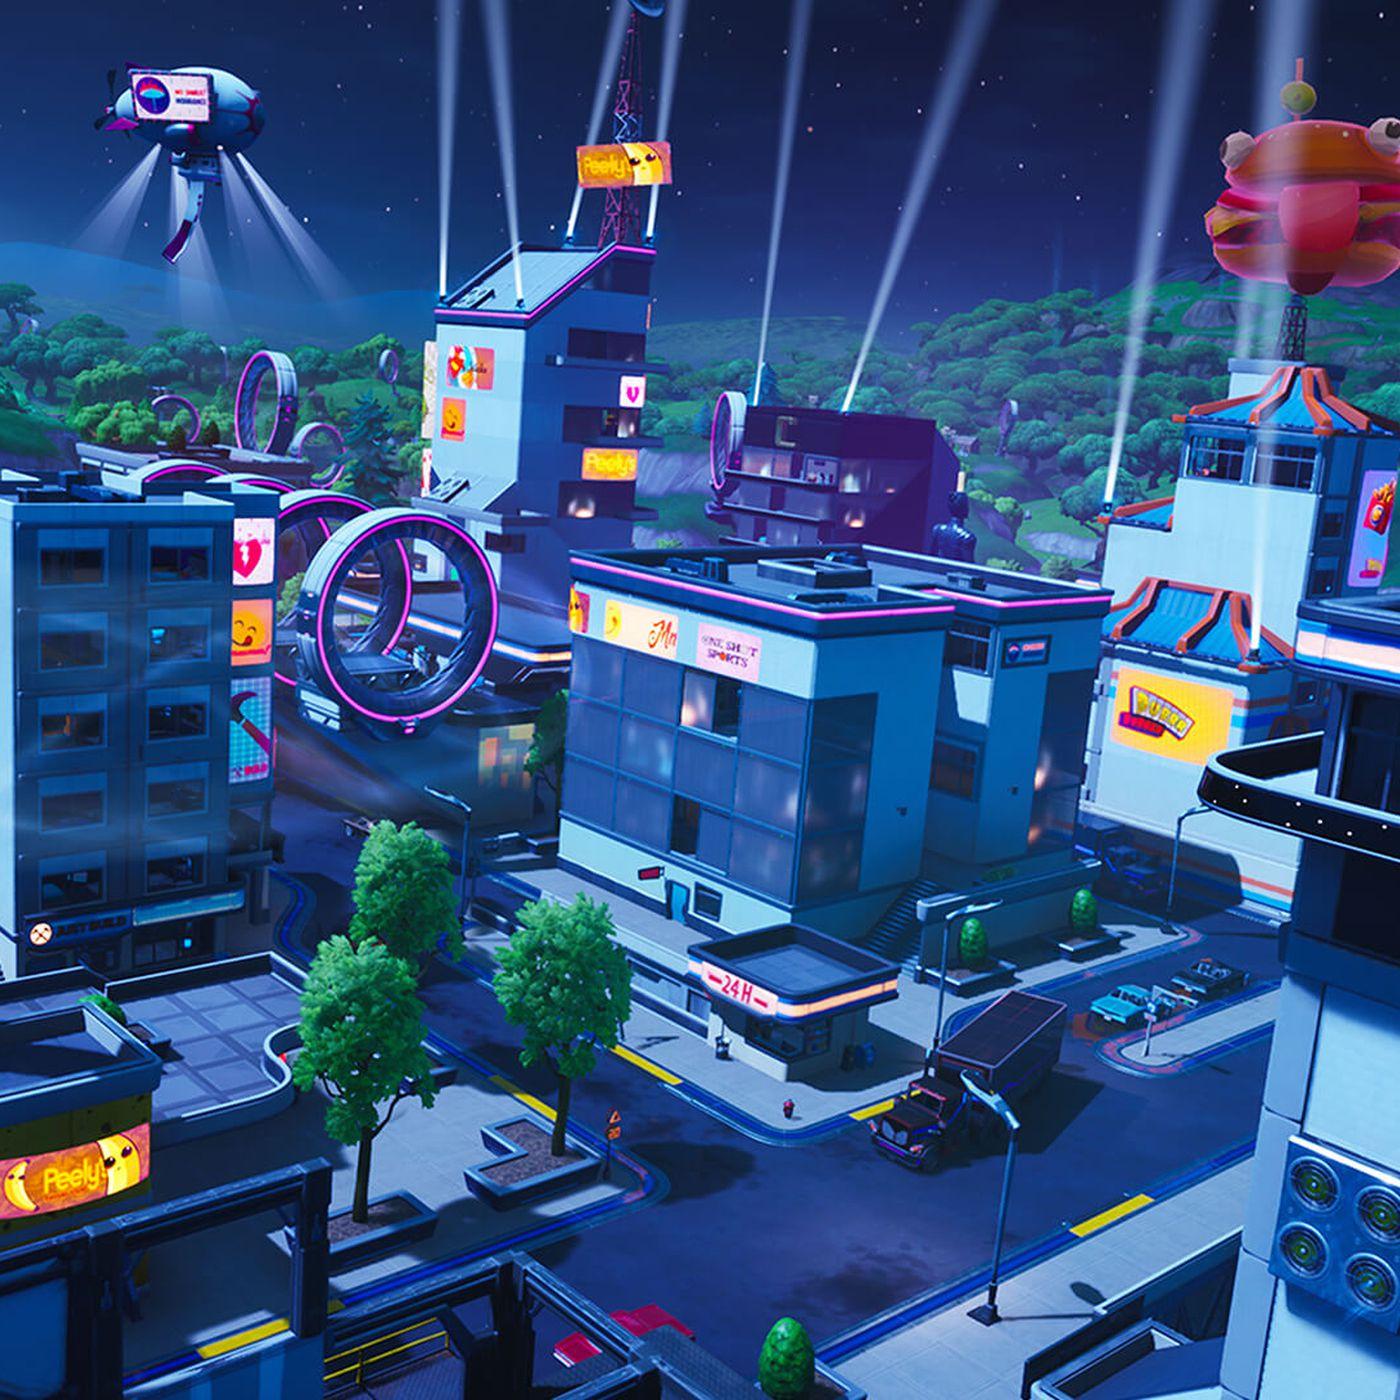 Fortnite season 9 adds wind tunnels and a rebuilt Tilted Towers